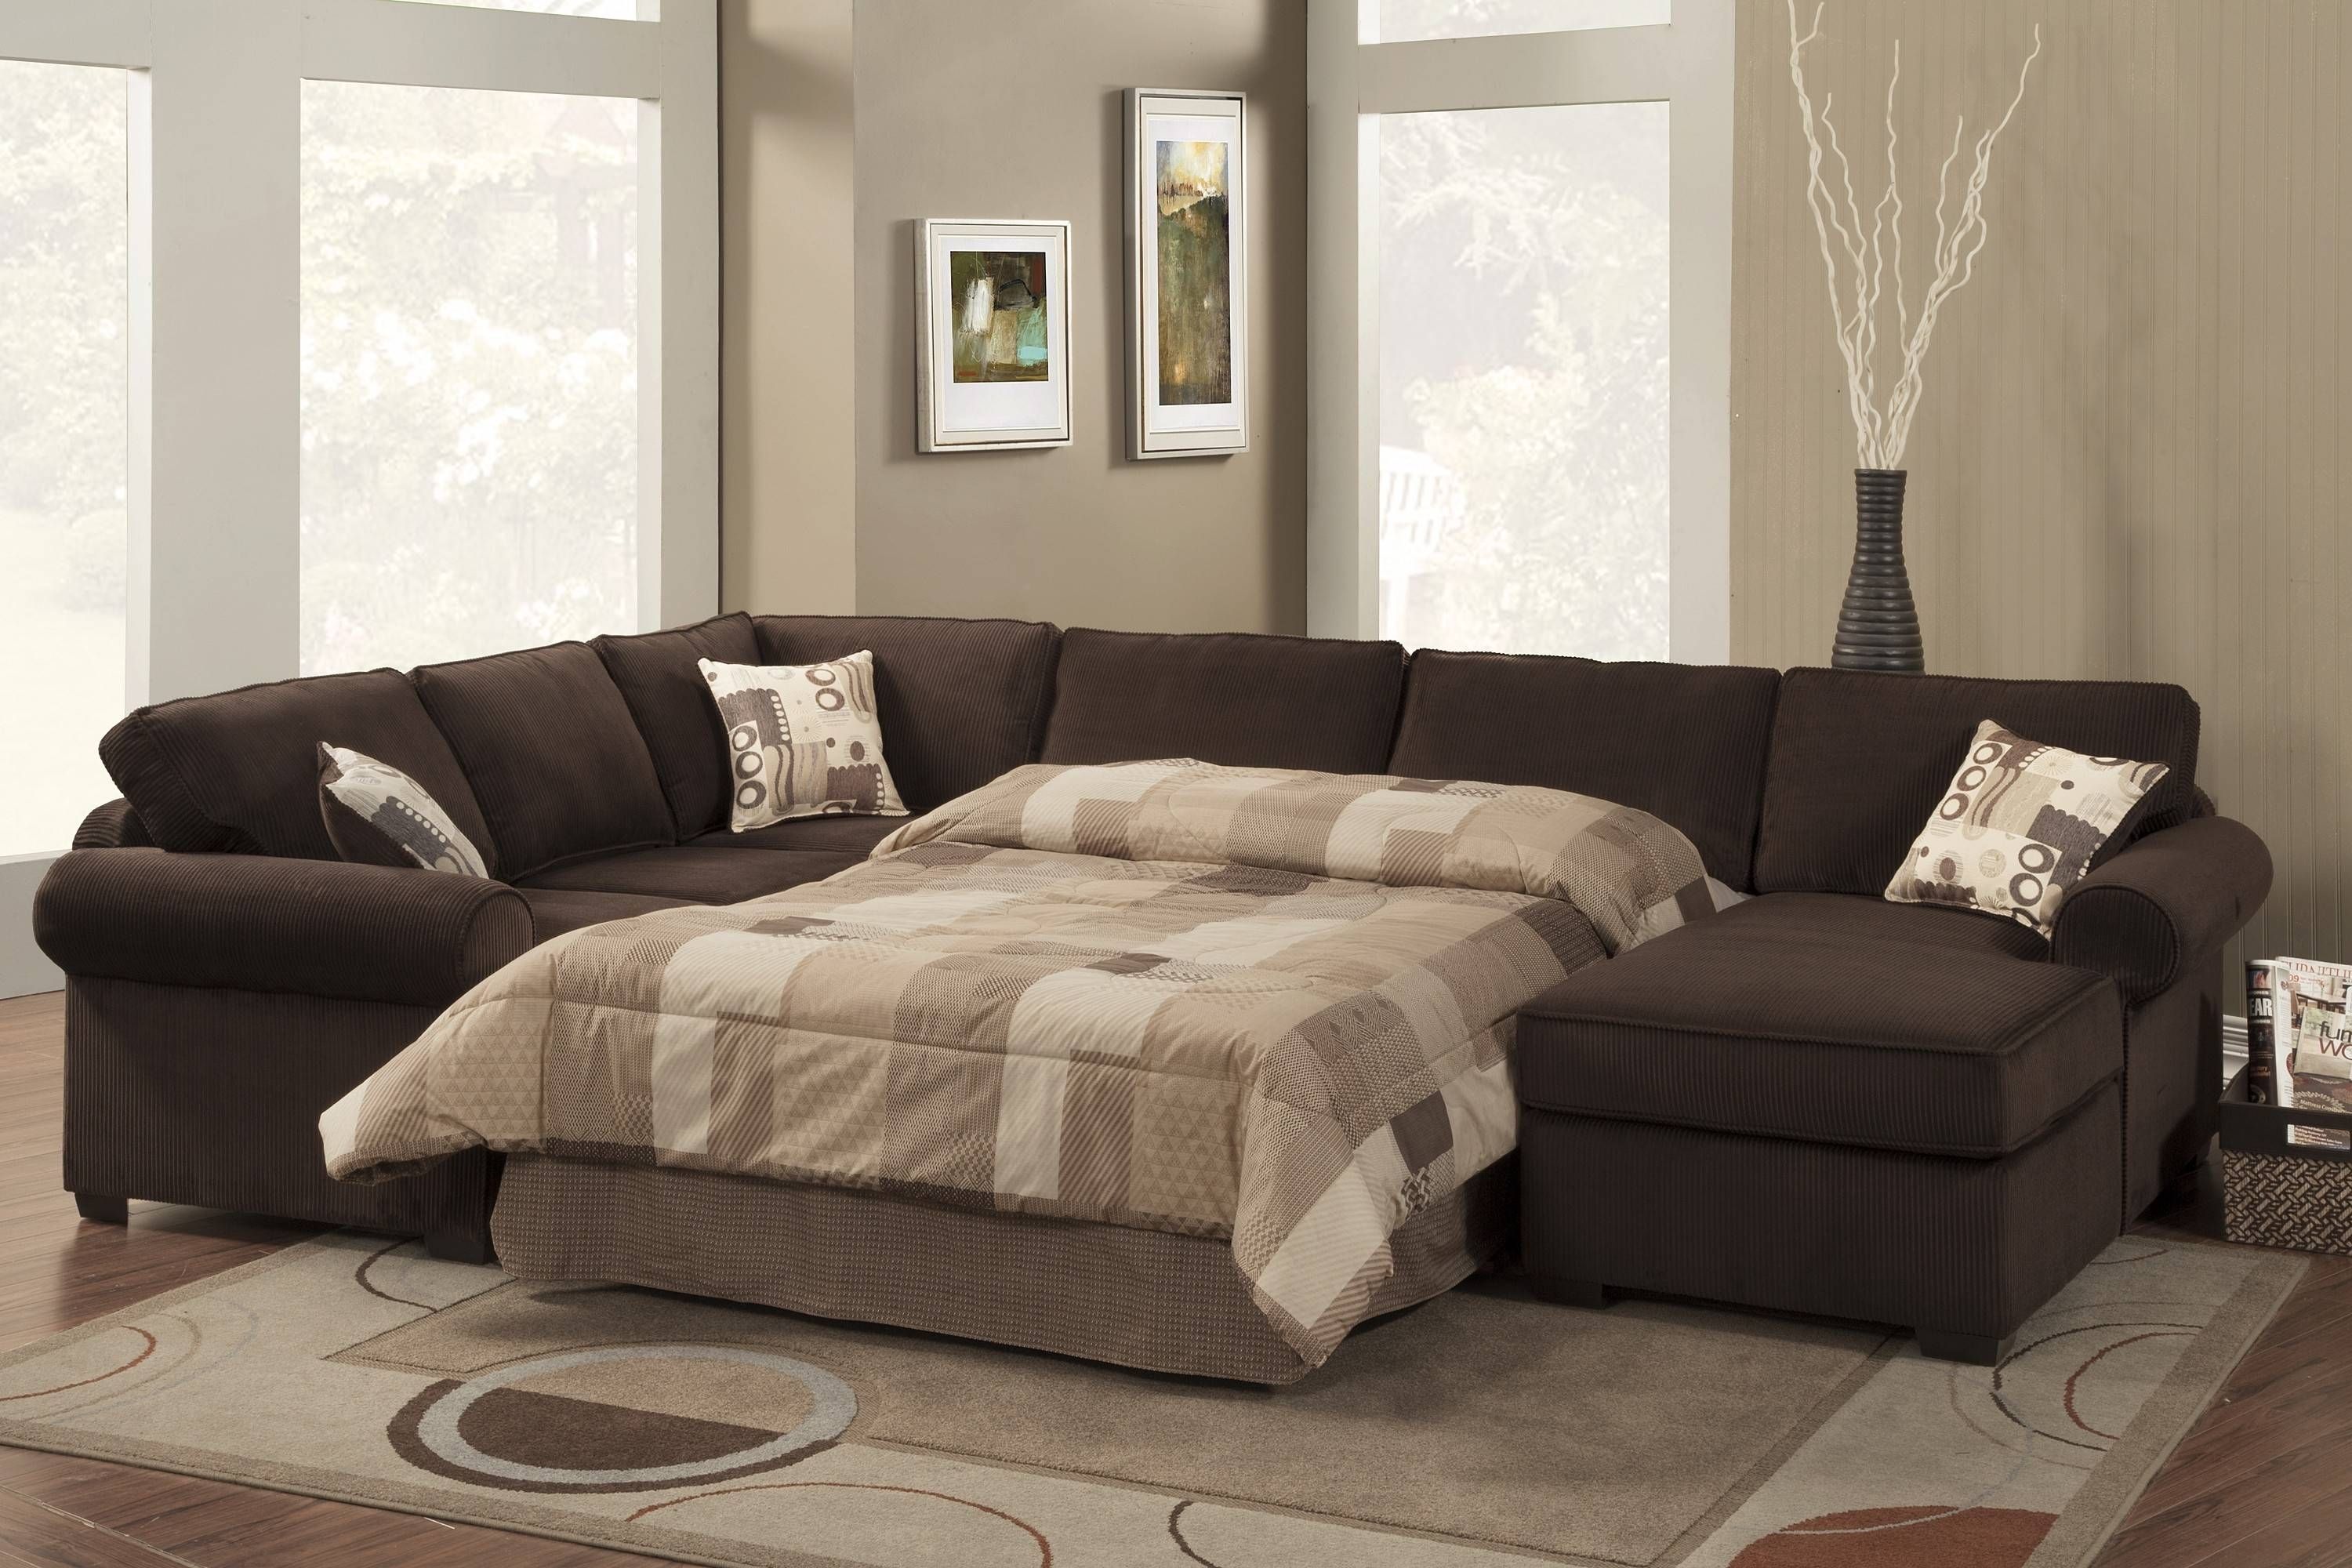 Sofa: Comfort And Style Is Evident In This Dynamic With Tufted For Tufted Sectional Sofa Chaise (View 23 of 25)